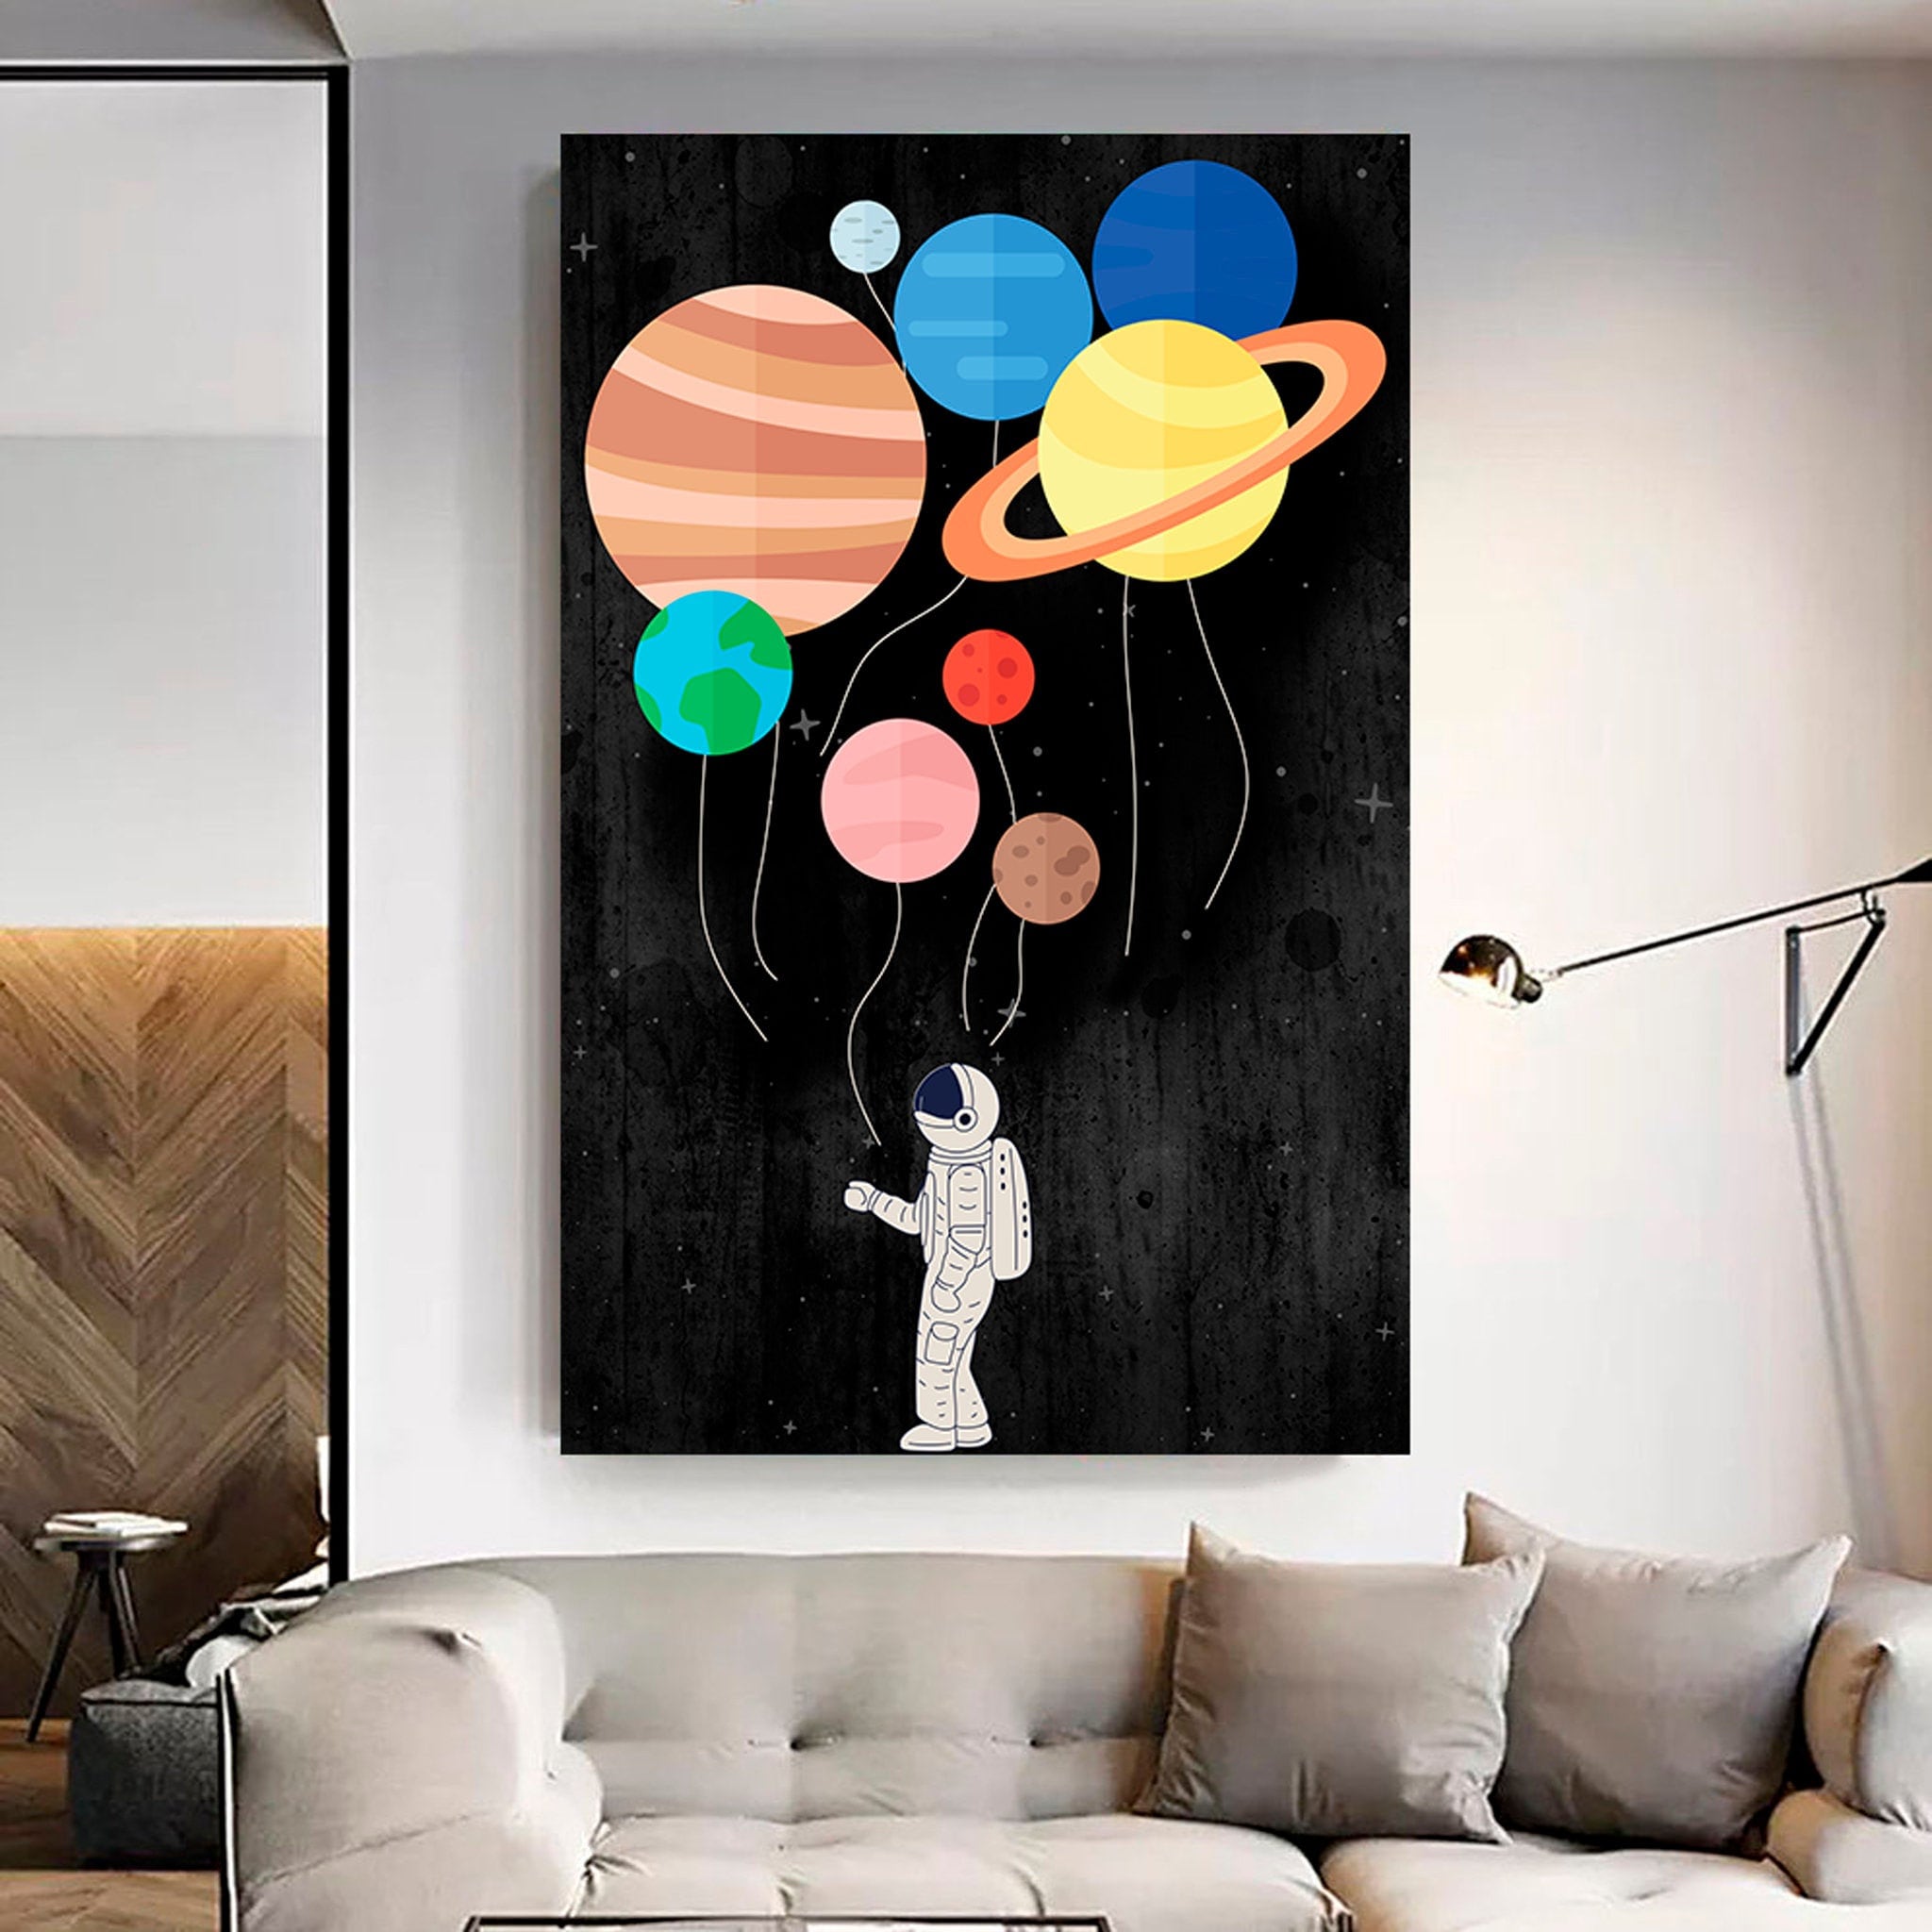 Stunning Graphic Space Wall Art 